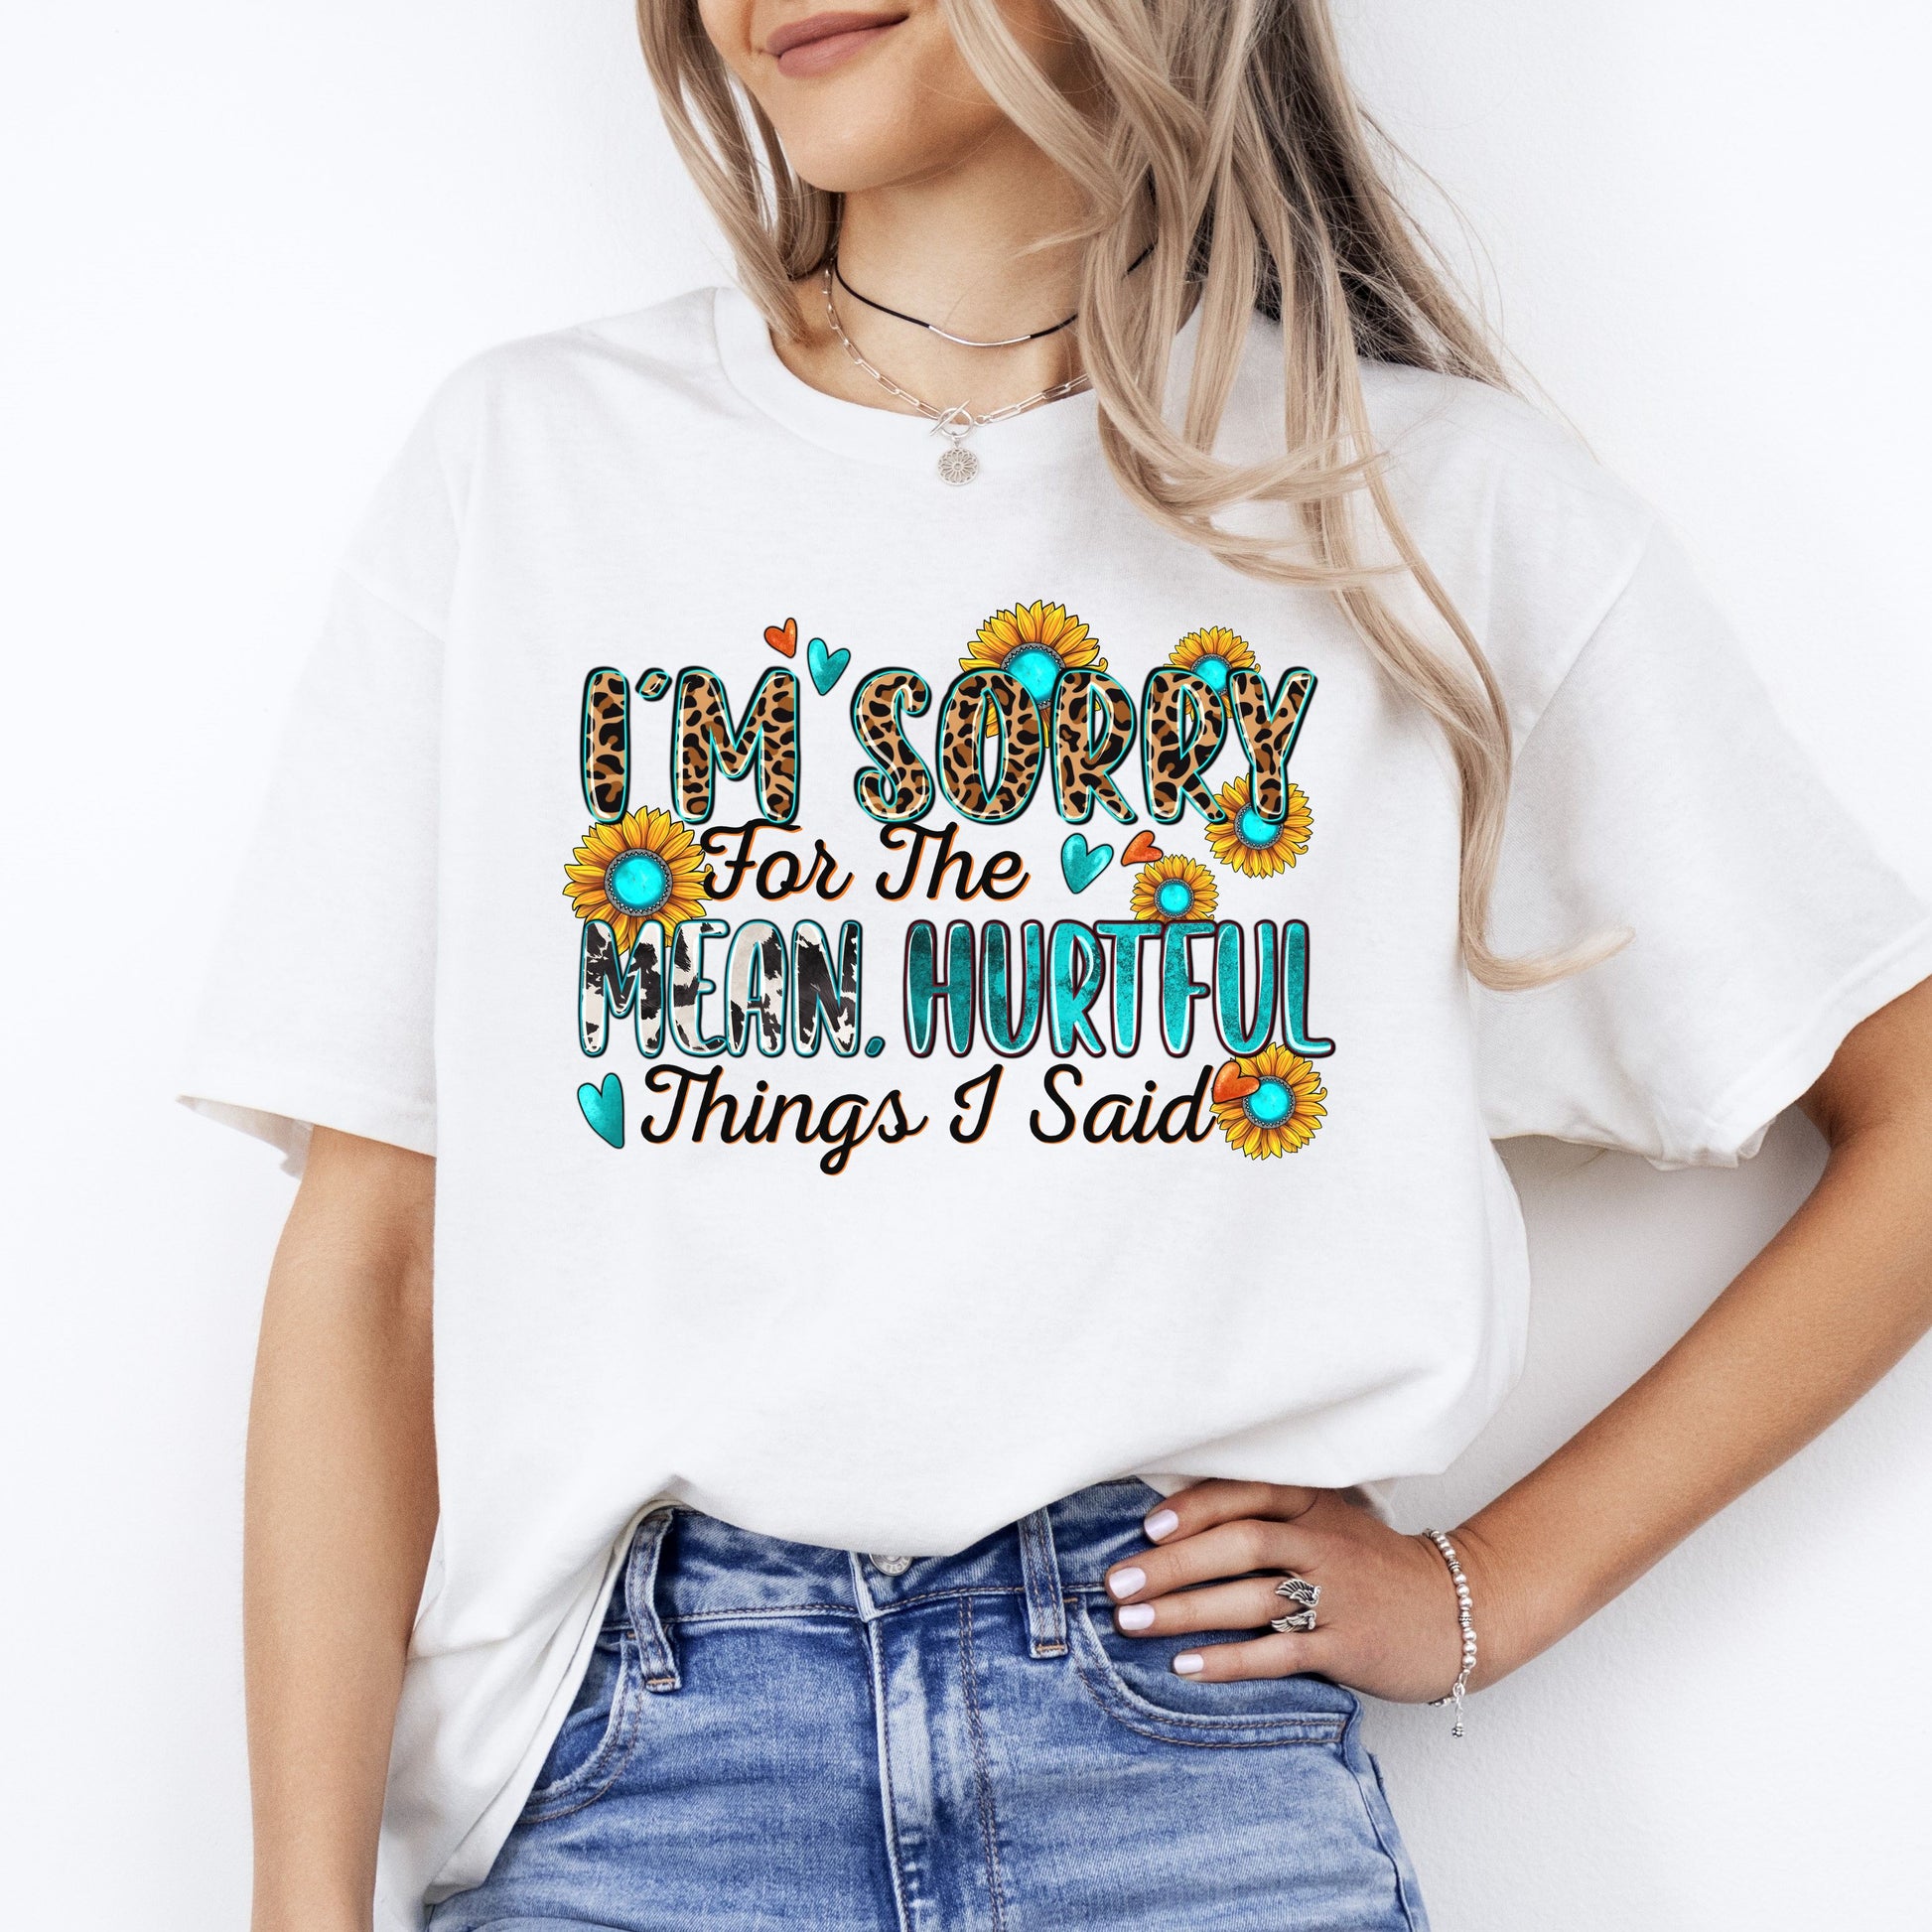 I'm sorry for the mean hurtful things I said T-Shirt gift Funny sarcastic Unisex tee Sand White Sport Grey-White-Family-Gift-Planet